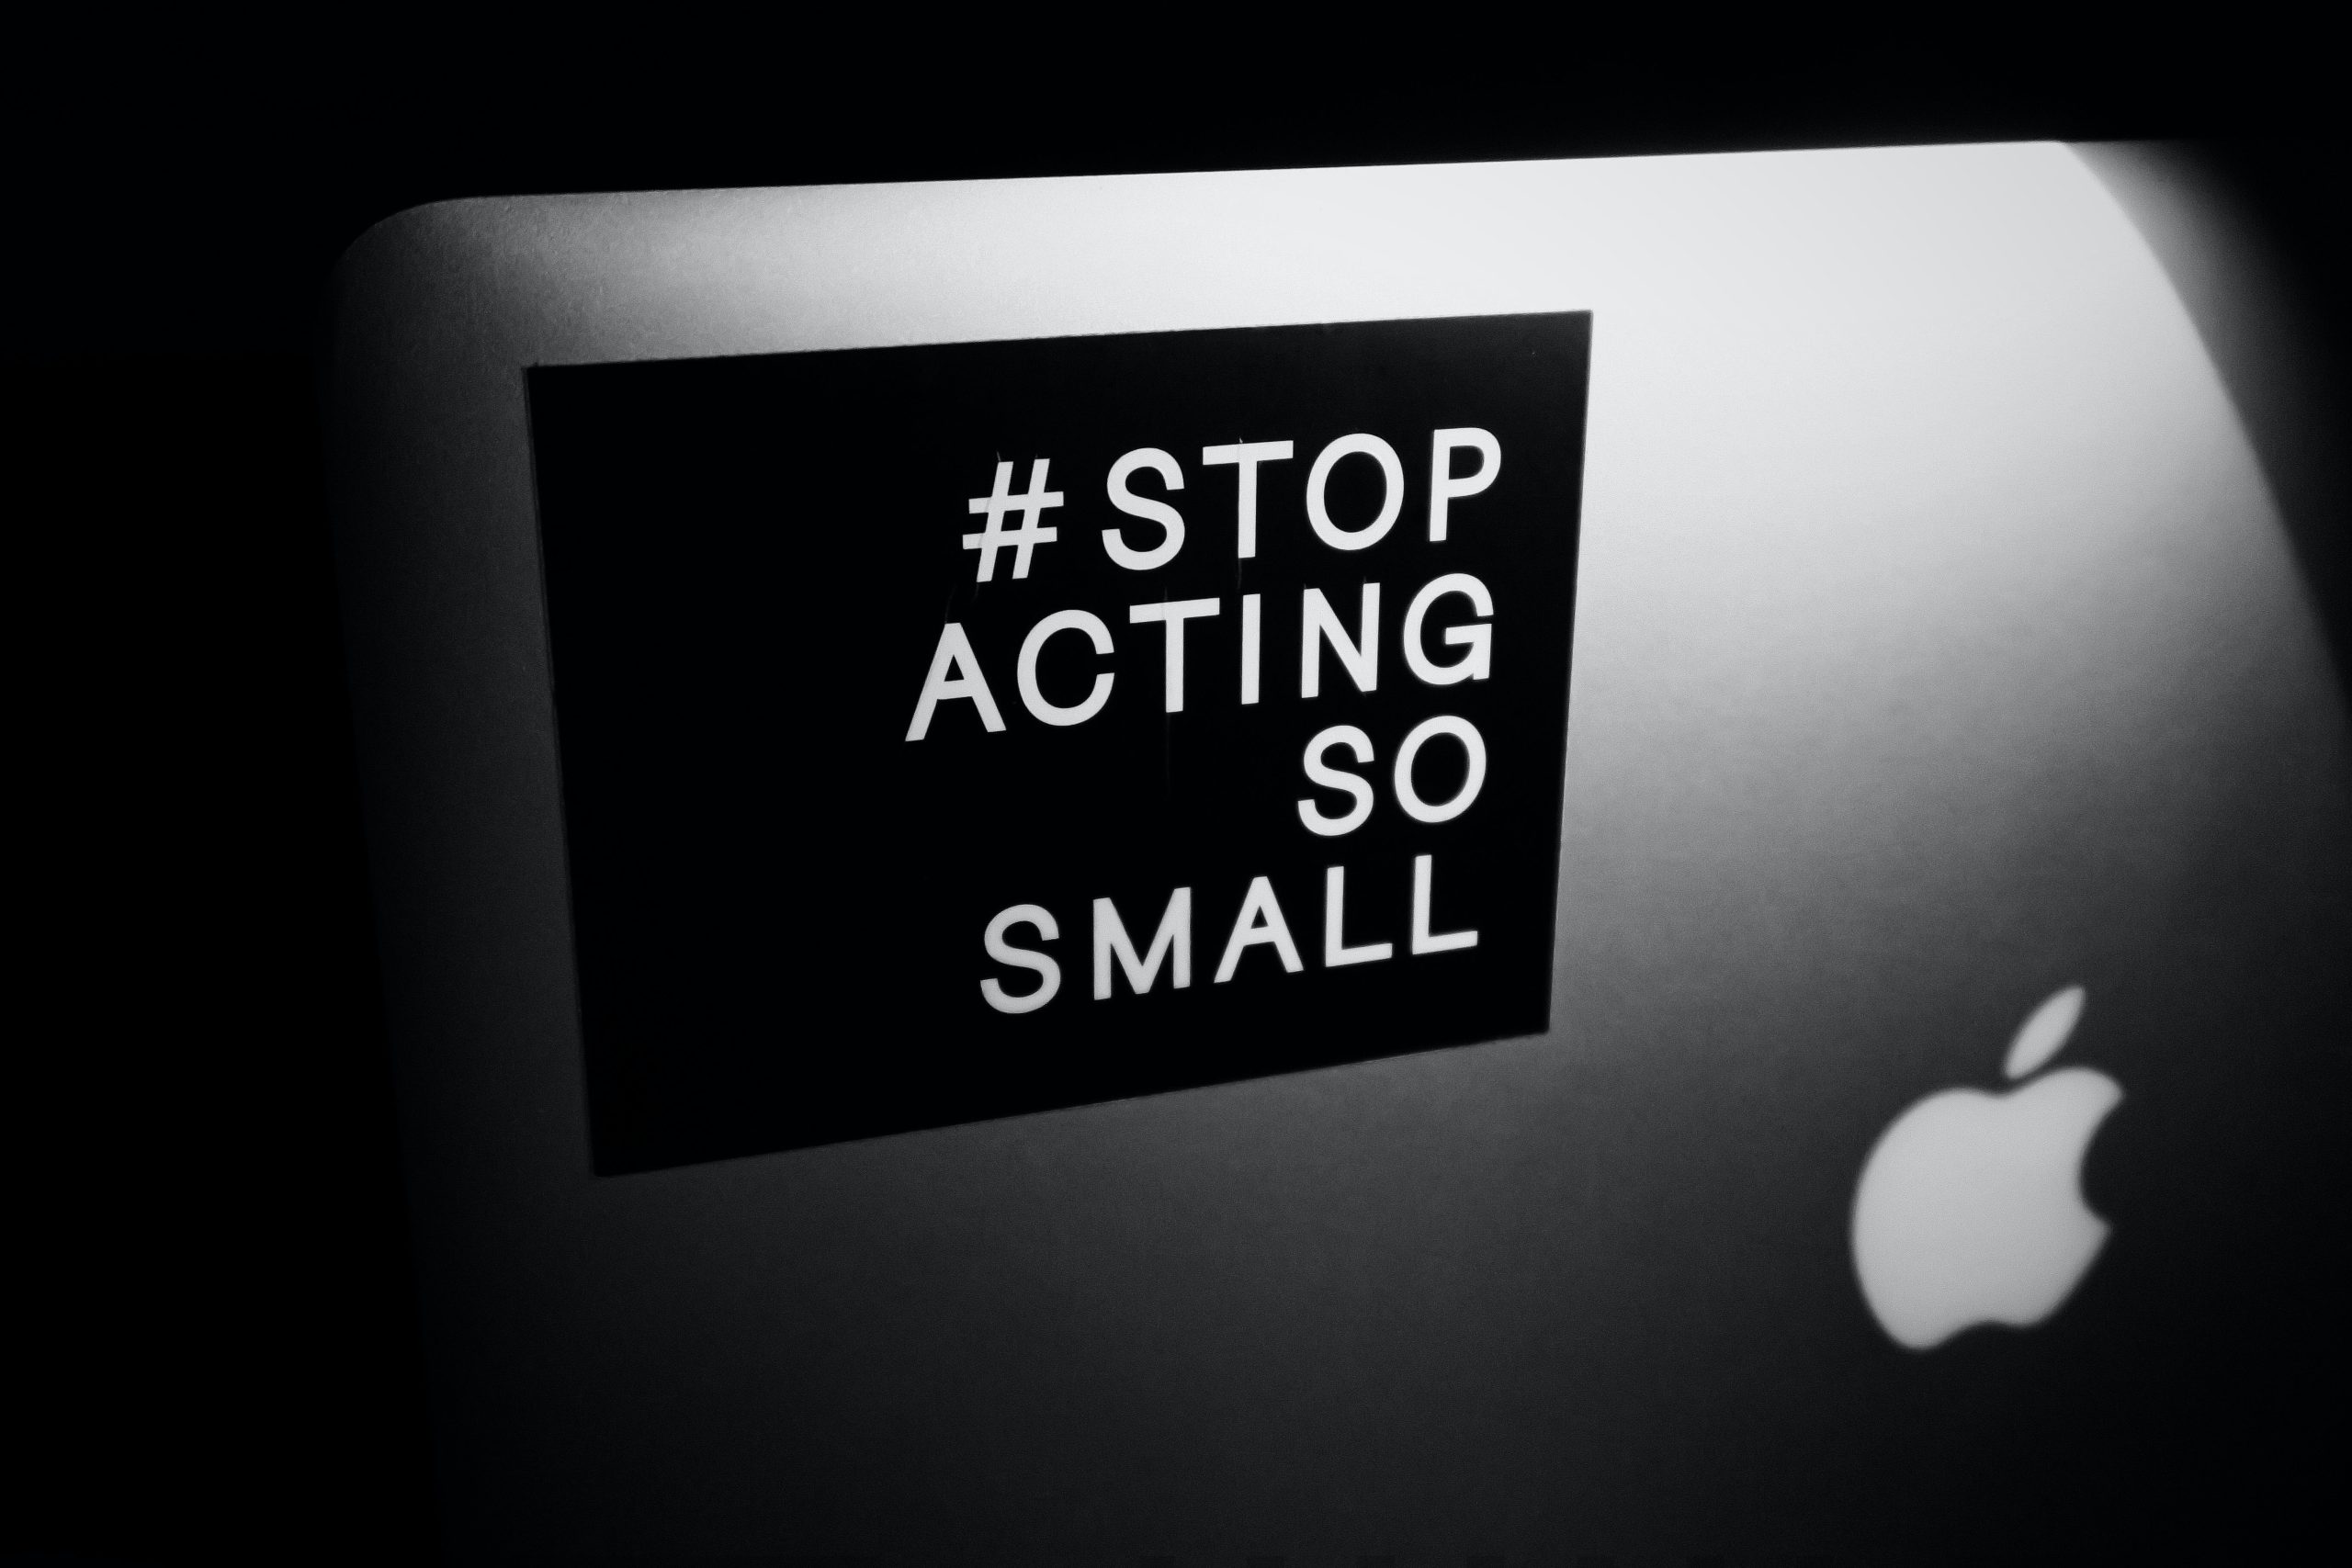 "#stop acting so small" sticker on a grey macbook.